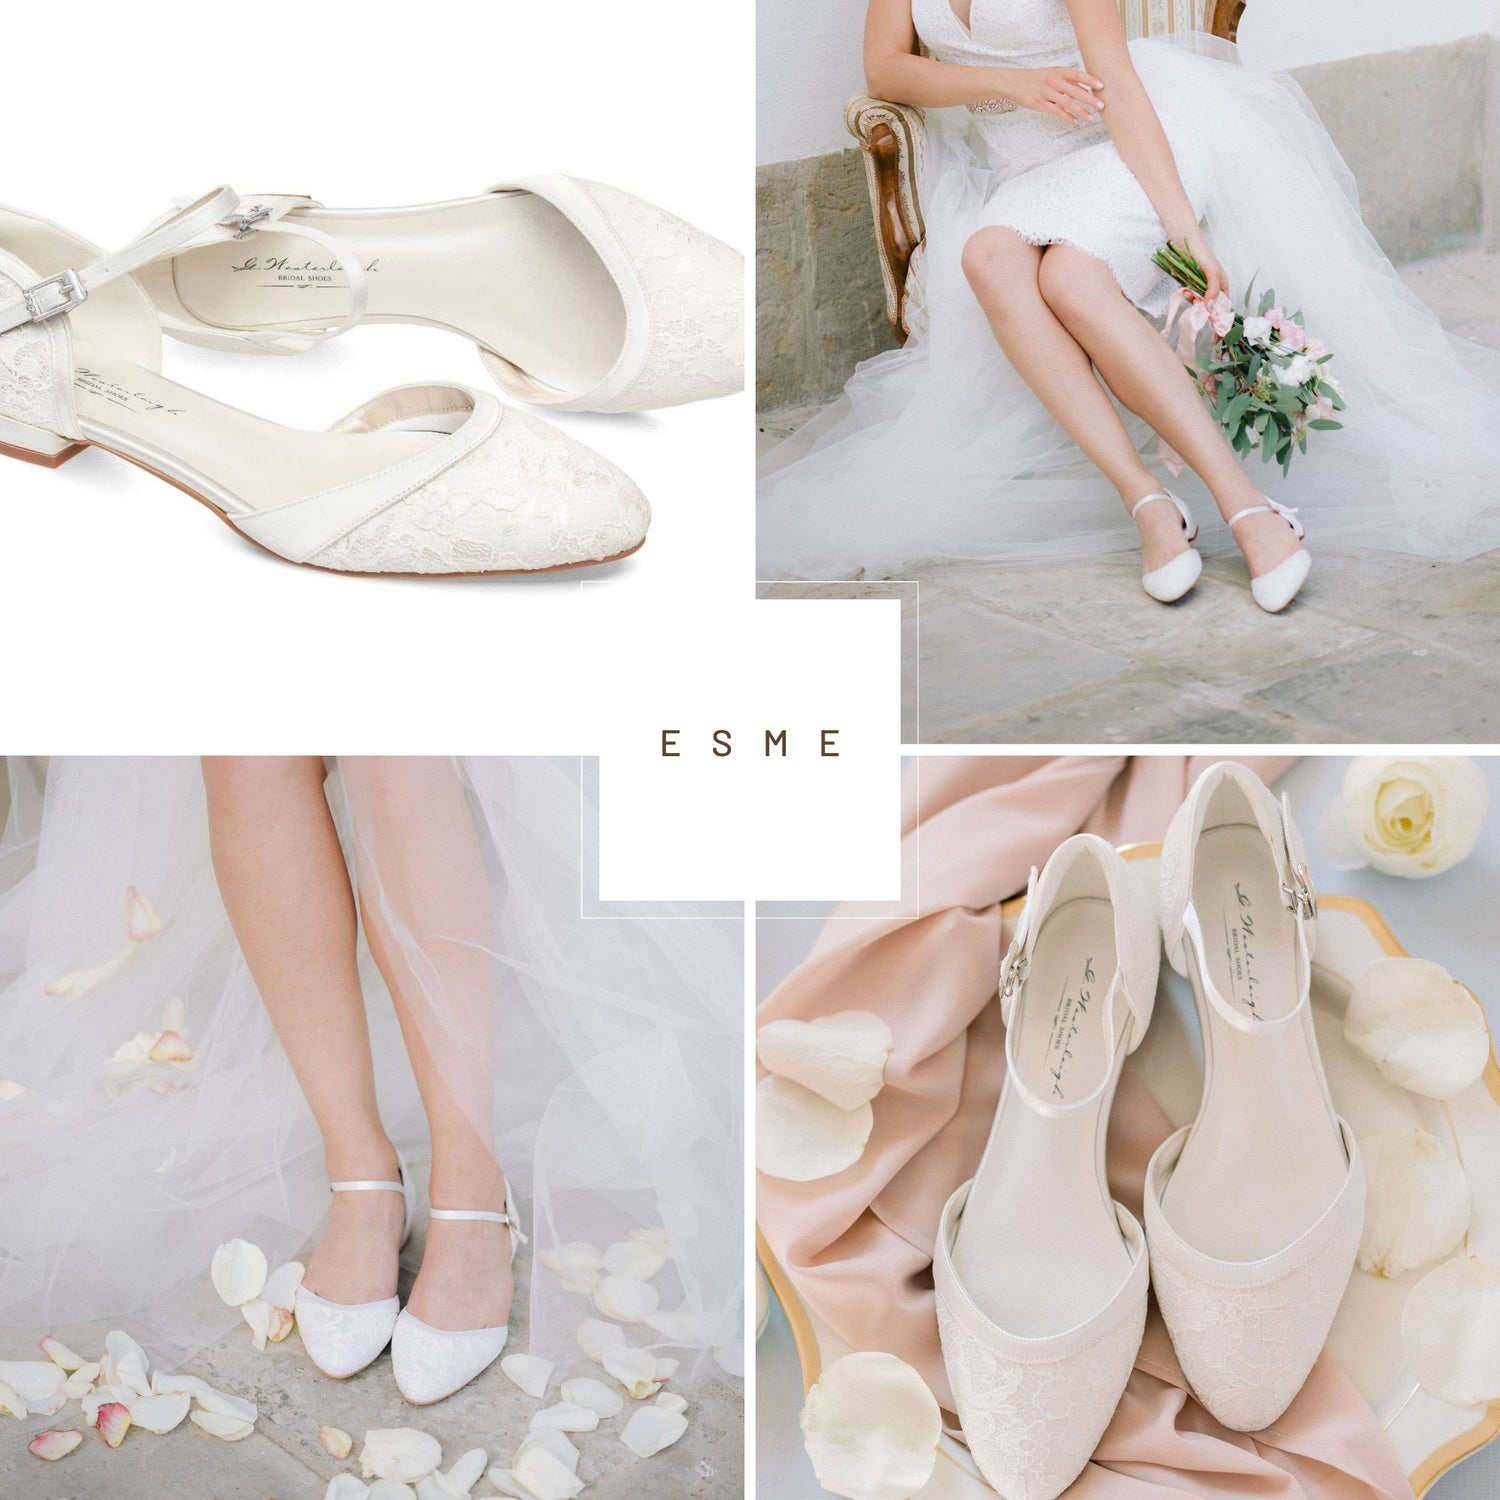 11 Ideas For Comfortable Bridal Shoes Which Are Not High Heels!